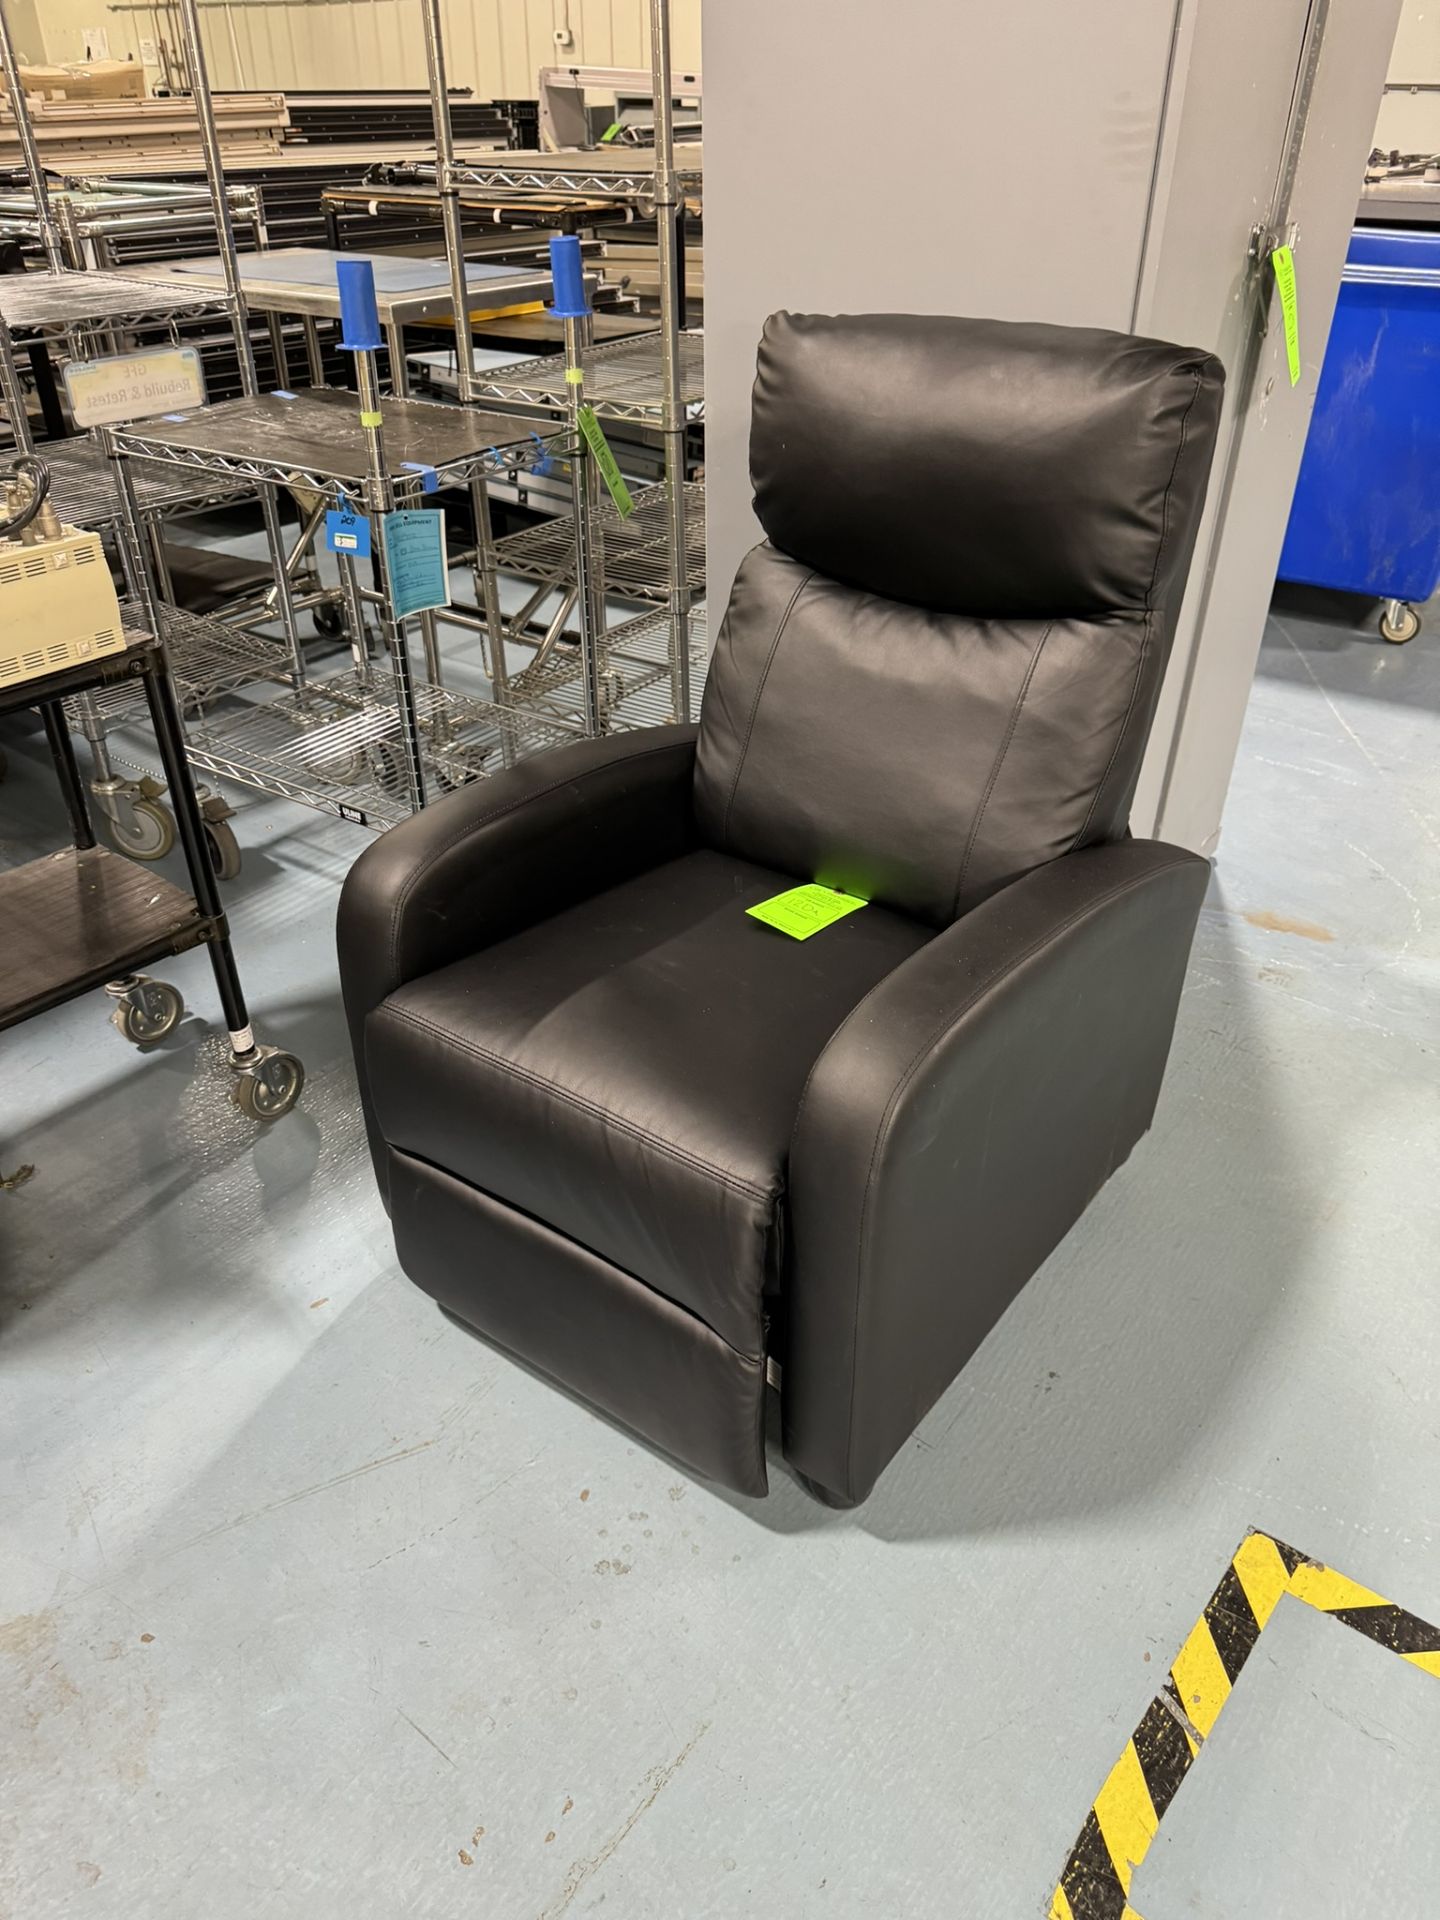 RECLINING RECEPTION CHAIR - Image 2 of 2